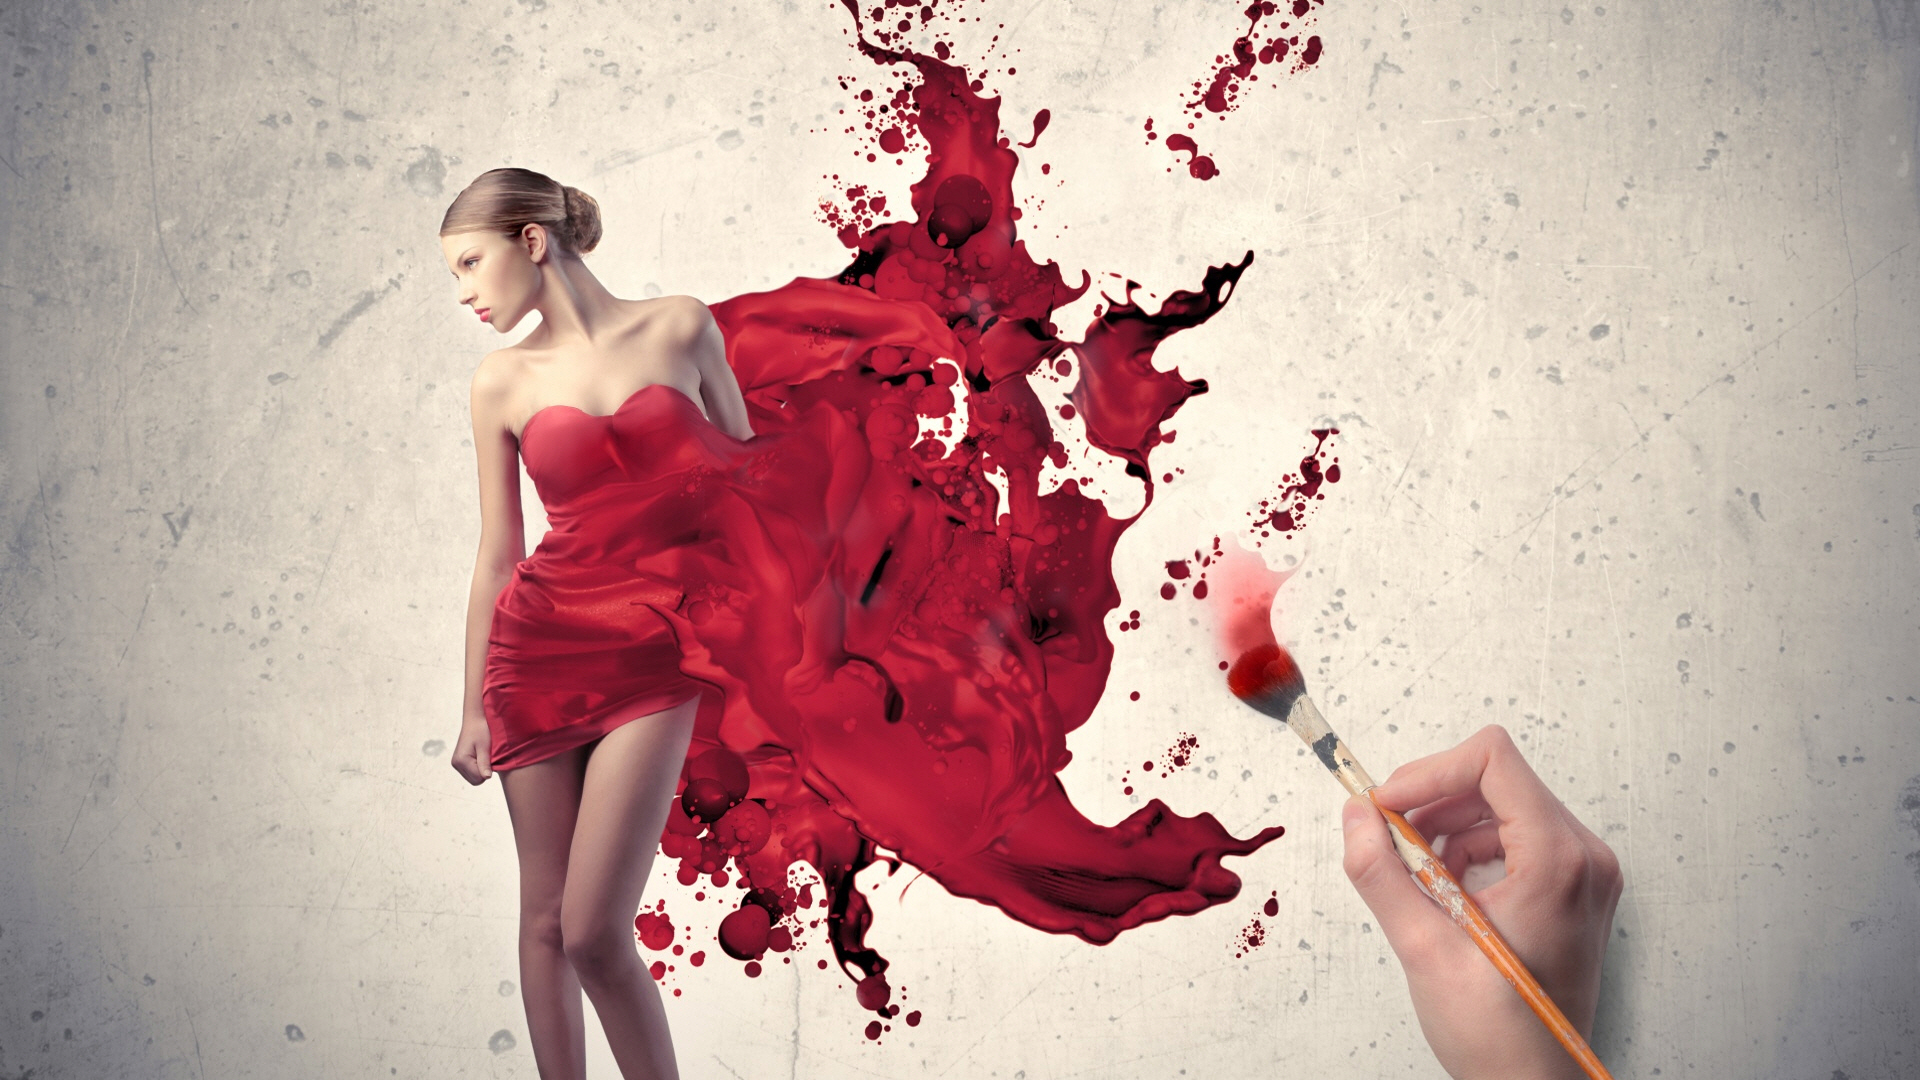 painting_the_woman_in_red-wallpaper-1920x1080.jpg